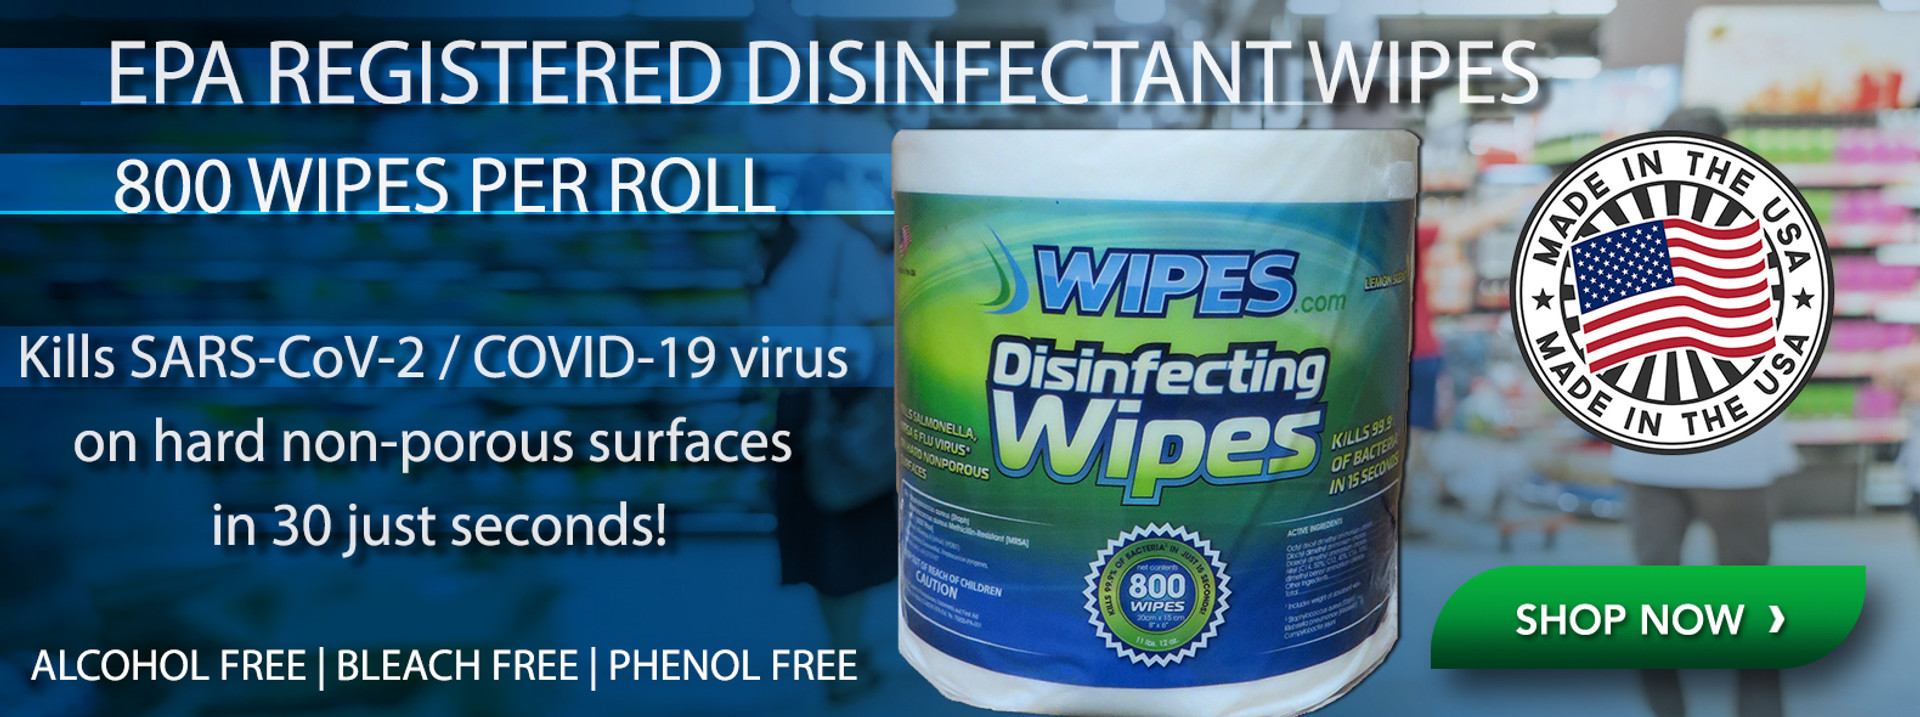 Show EPA Registered Disinfectant Wipes Today